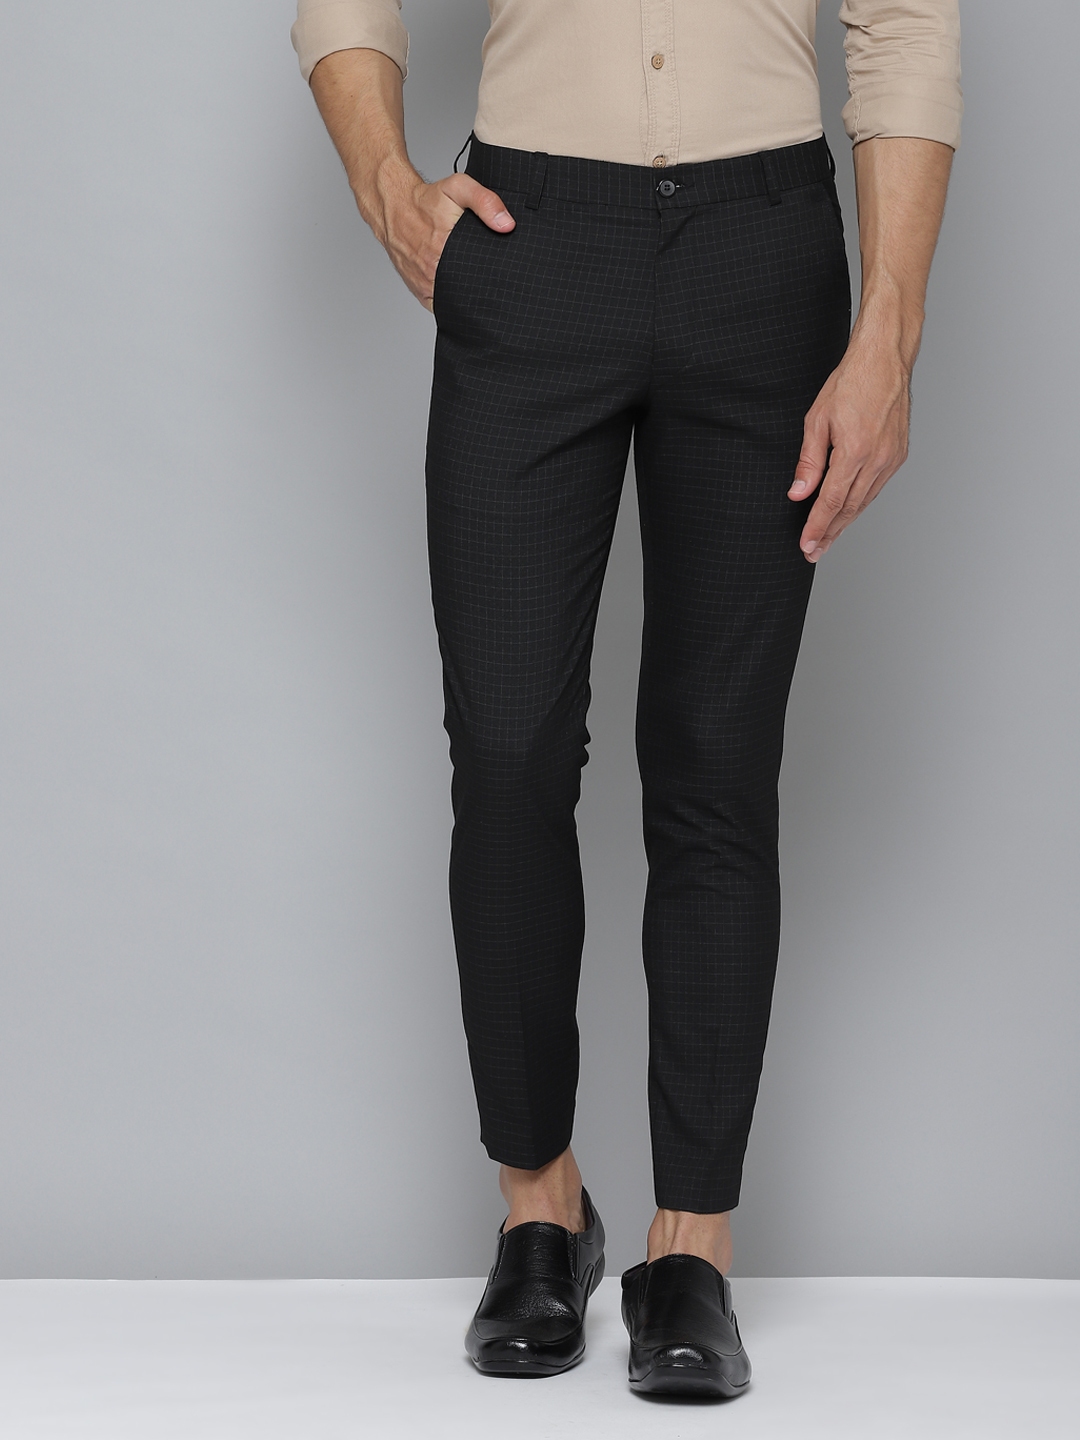 Buy DENNISON Men Black & Grey Smart Tapered Fit Checked Cropped ...